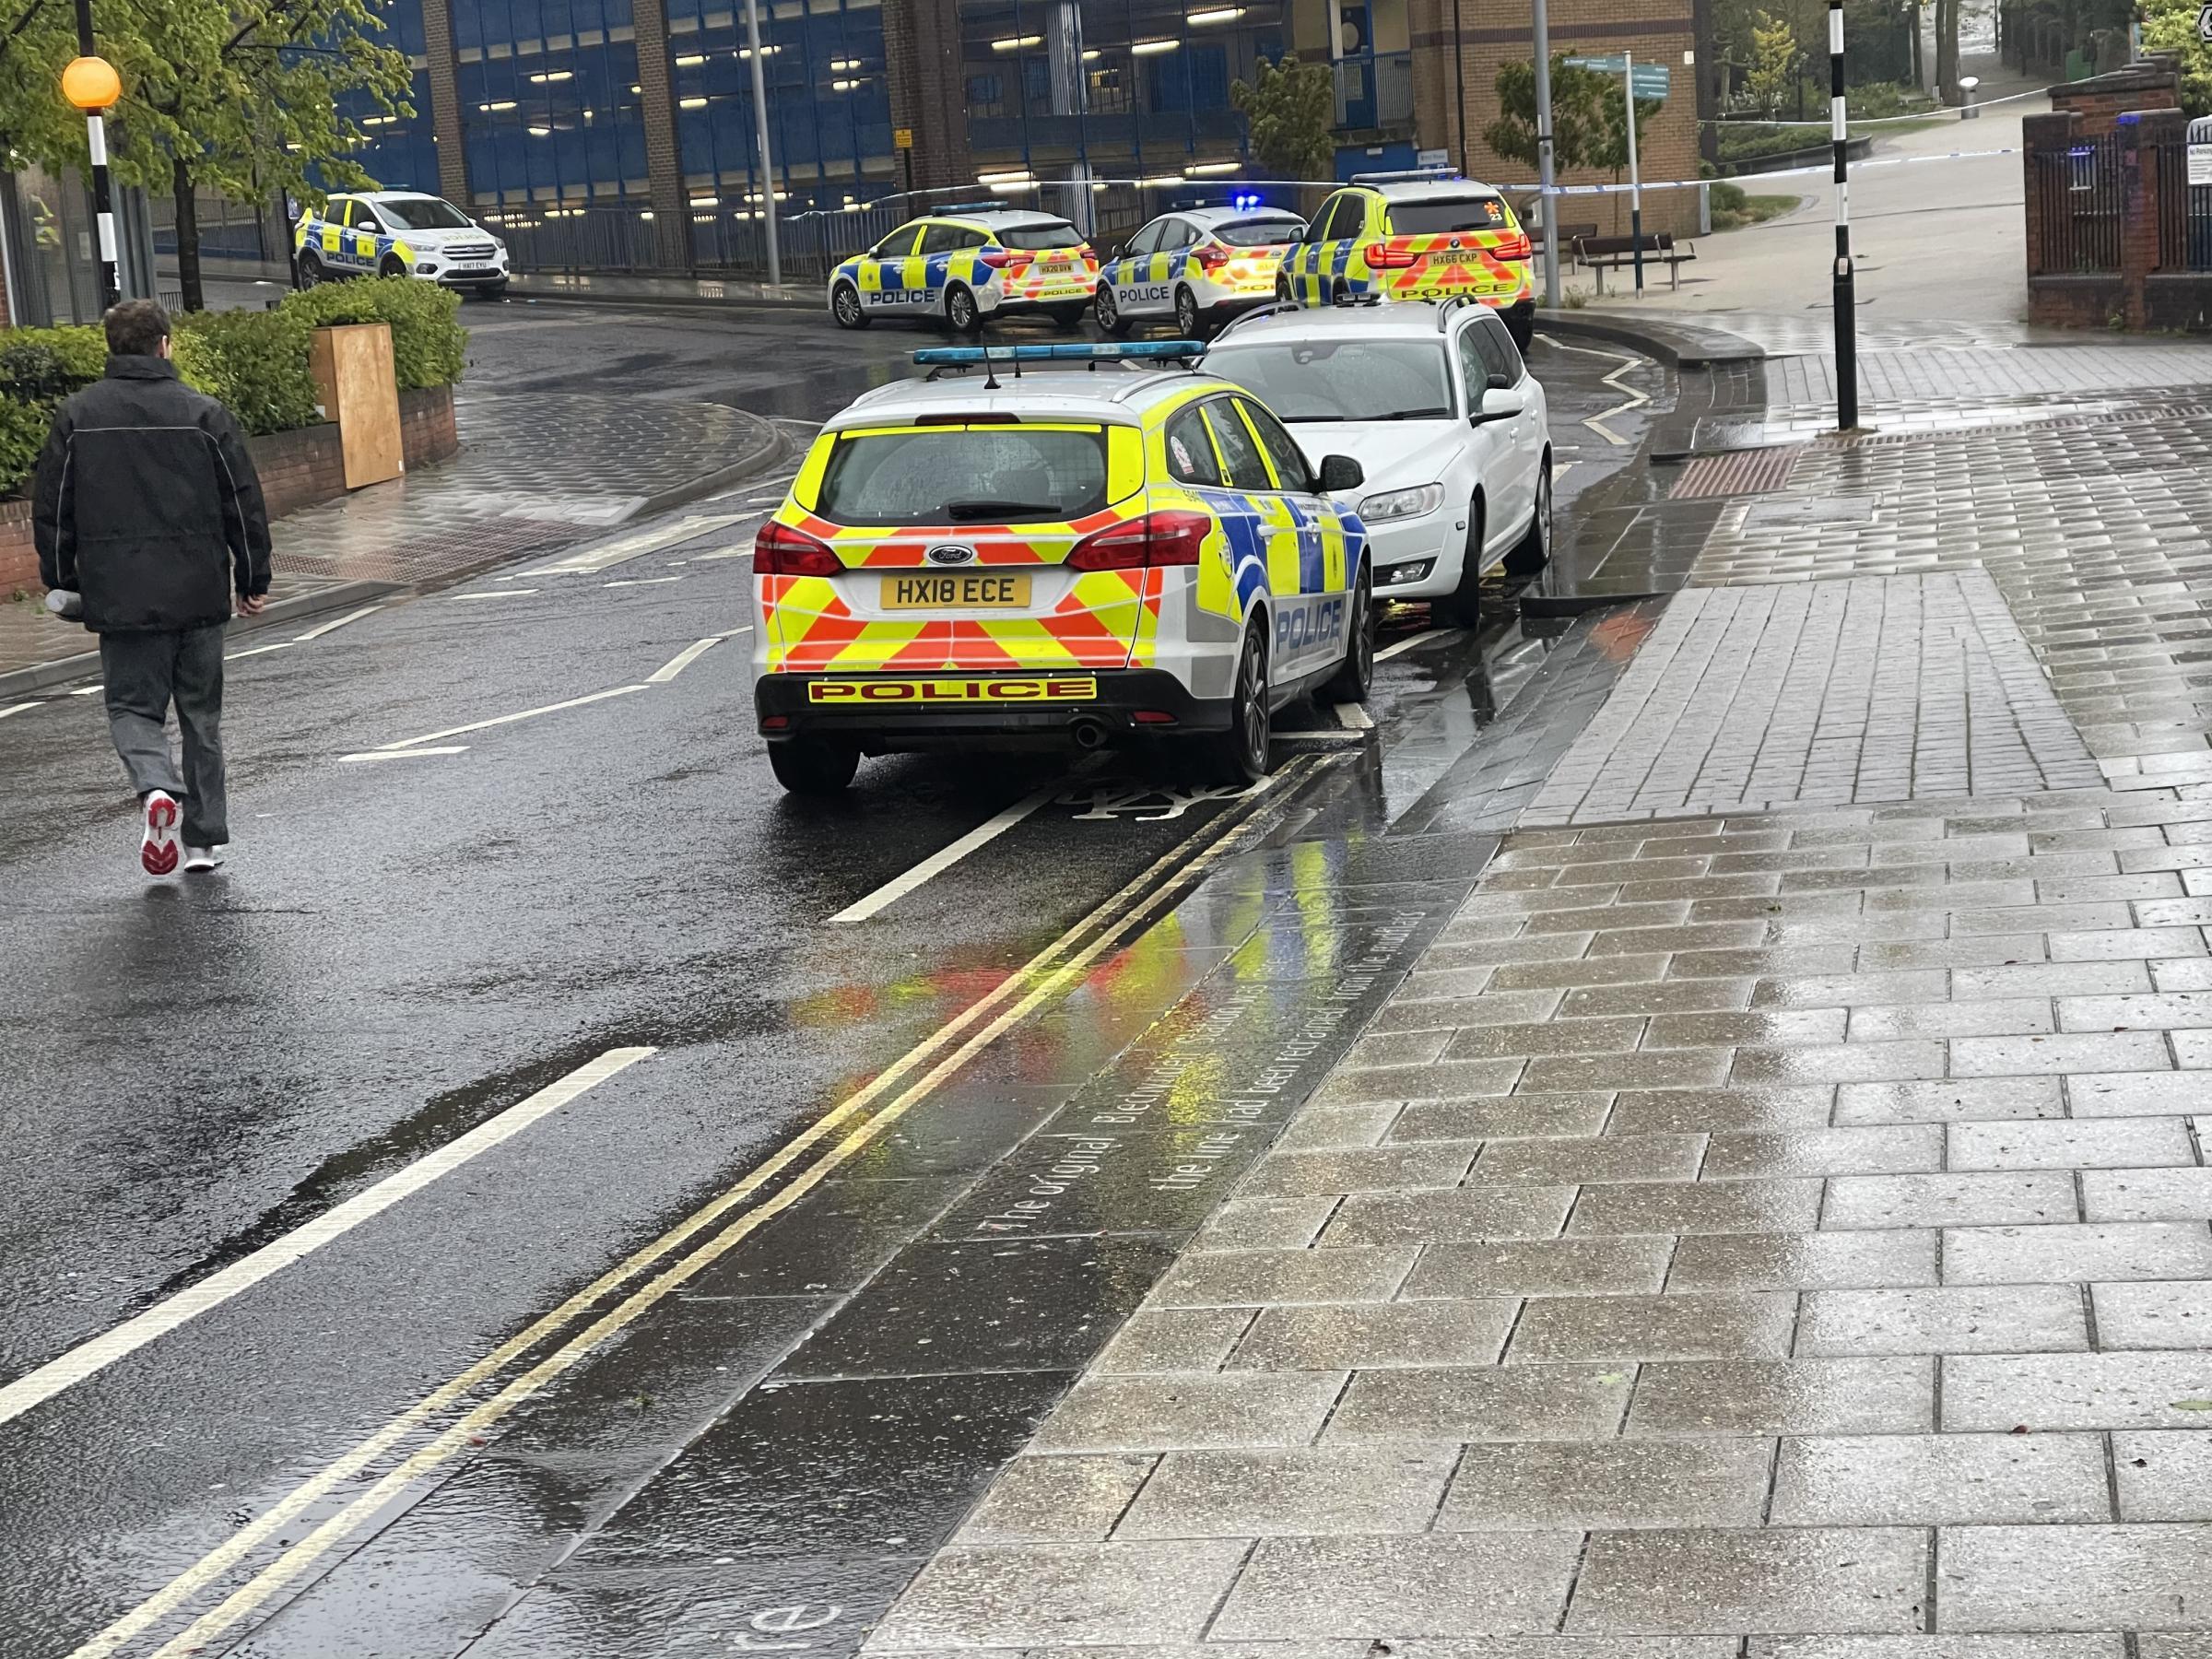 Police operation in West Park Road, Southampton on May 3, 2021